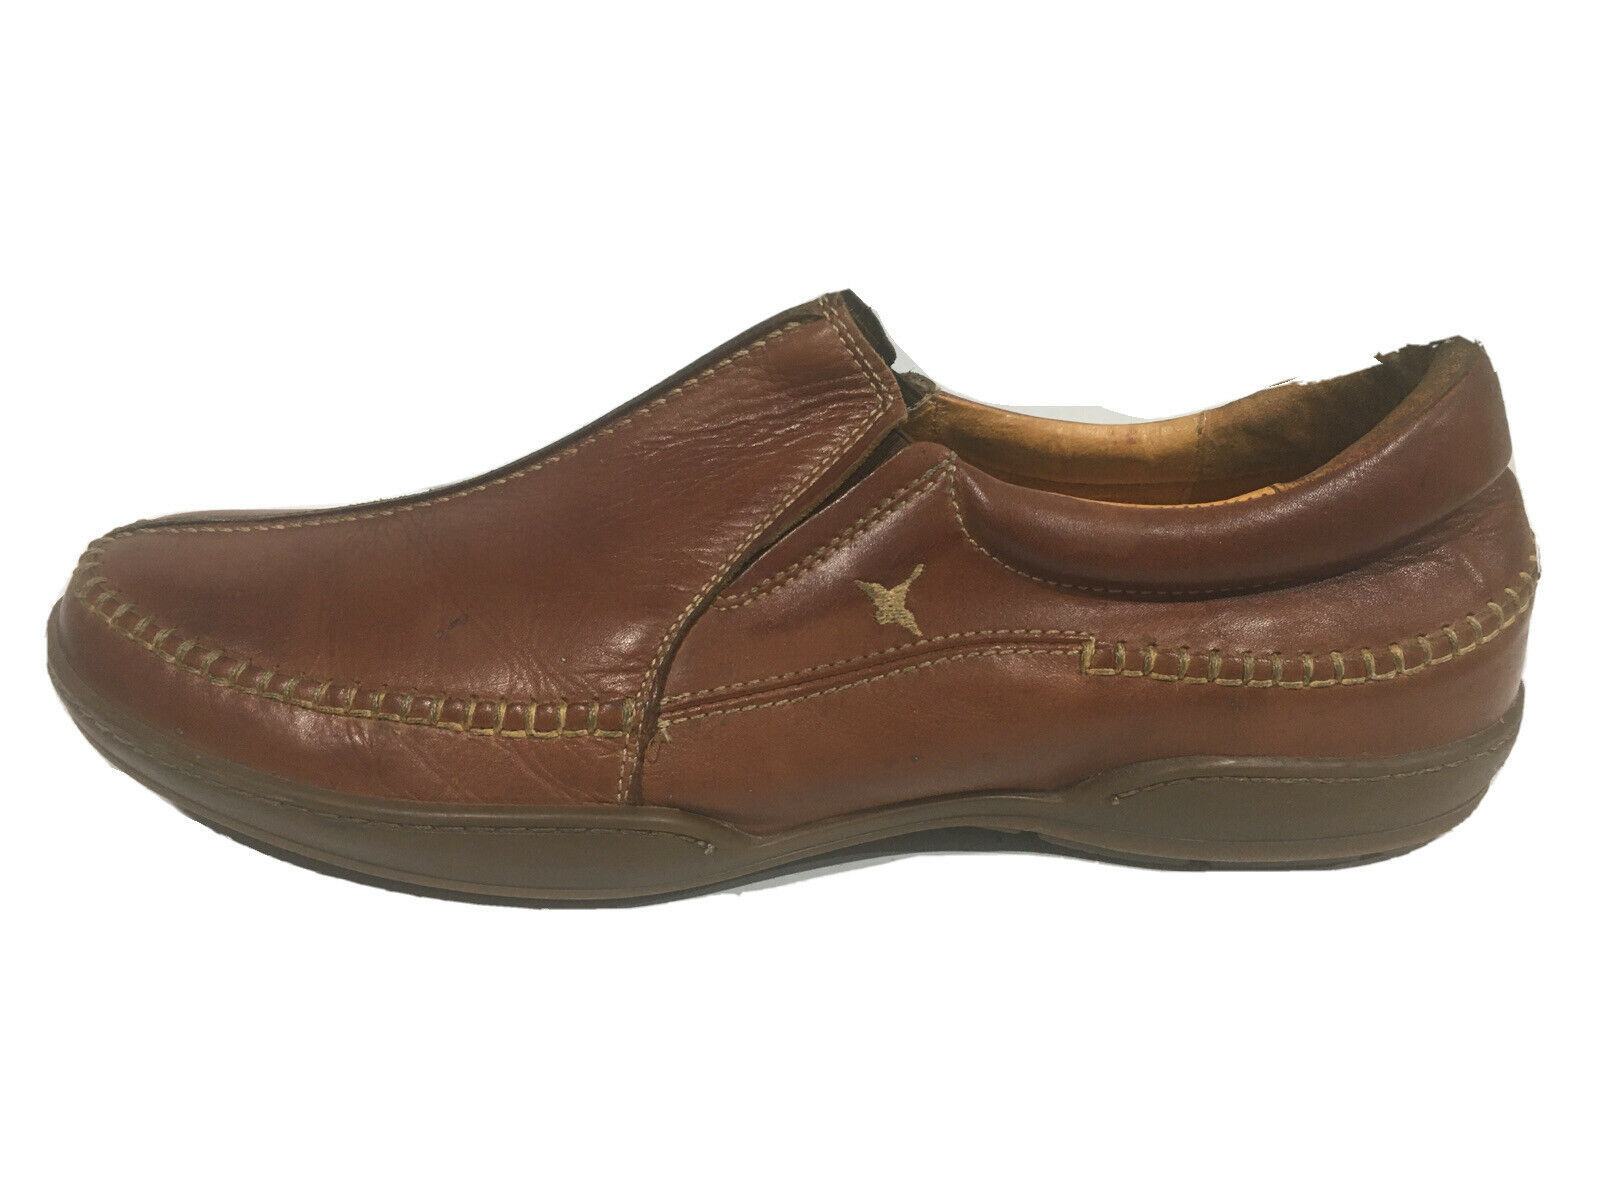 Pikolinos Puerto Rico Loafer Driving Slip On Shoes Mens 46 / 11.5 Brown ...